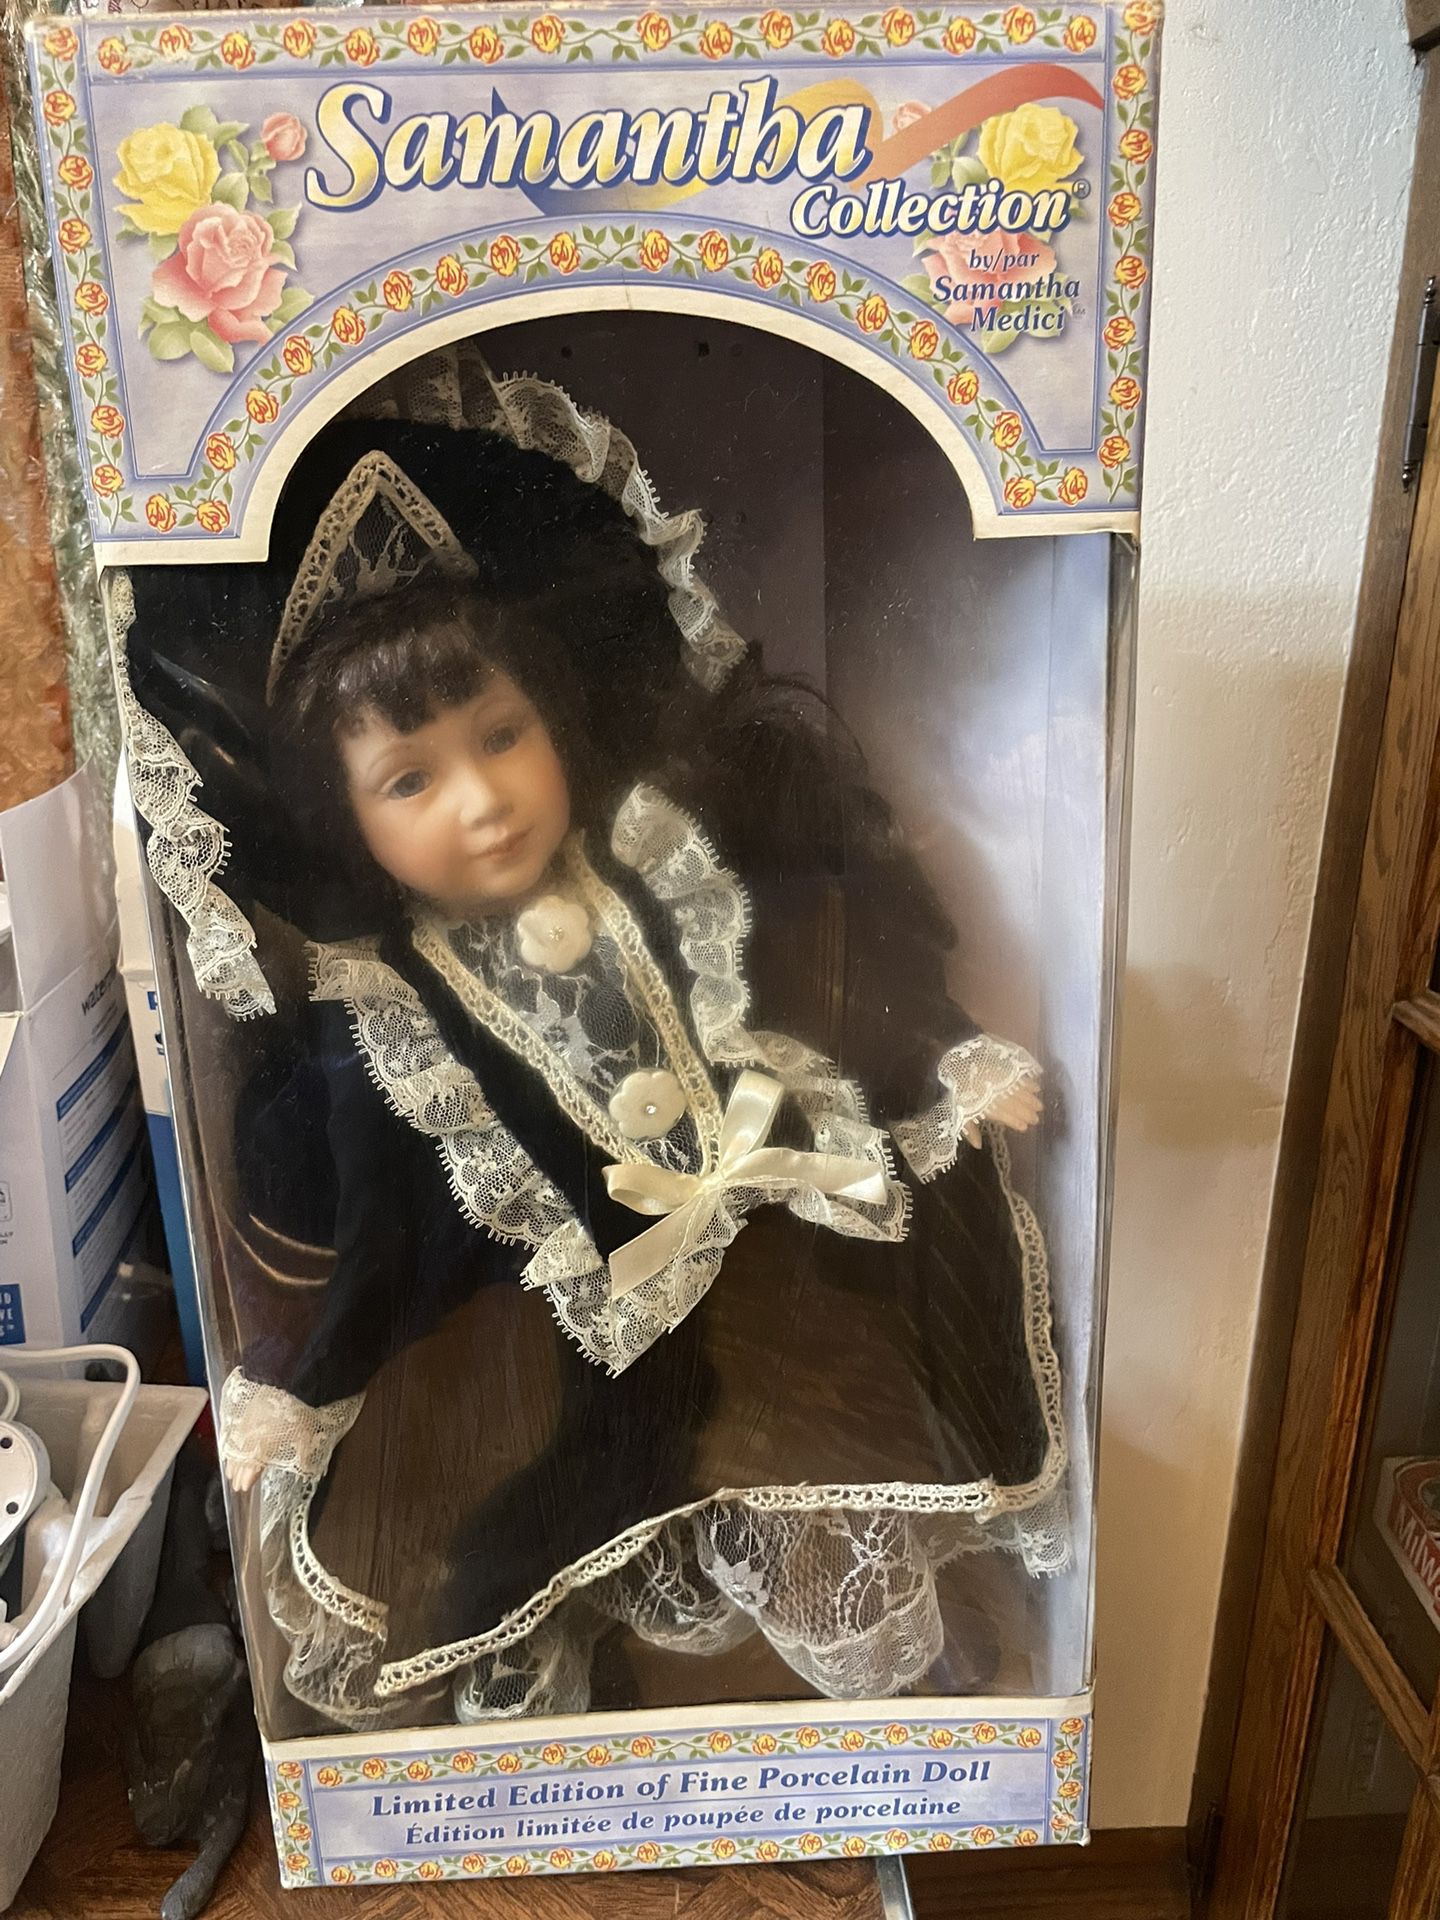 Porcelain Doll Limited Edition “Samantha” In Box, Stand Included 